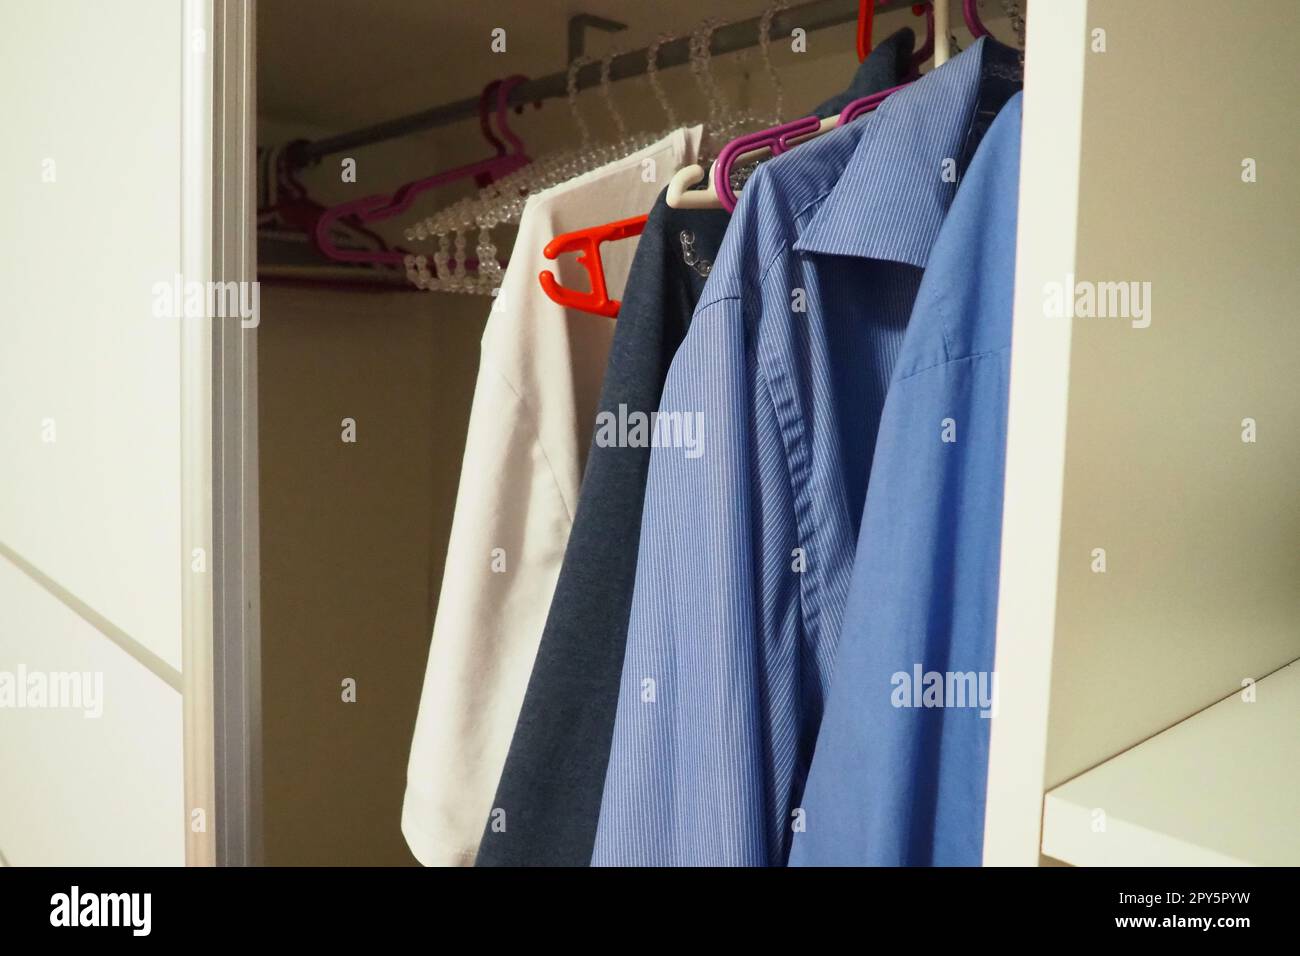 Men's shirts hang on hangers in an open white closet. Men's fashion. Organization of things in a closet or dressing room. Blue and white shirts. Housekeeping. Stock Photo